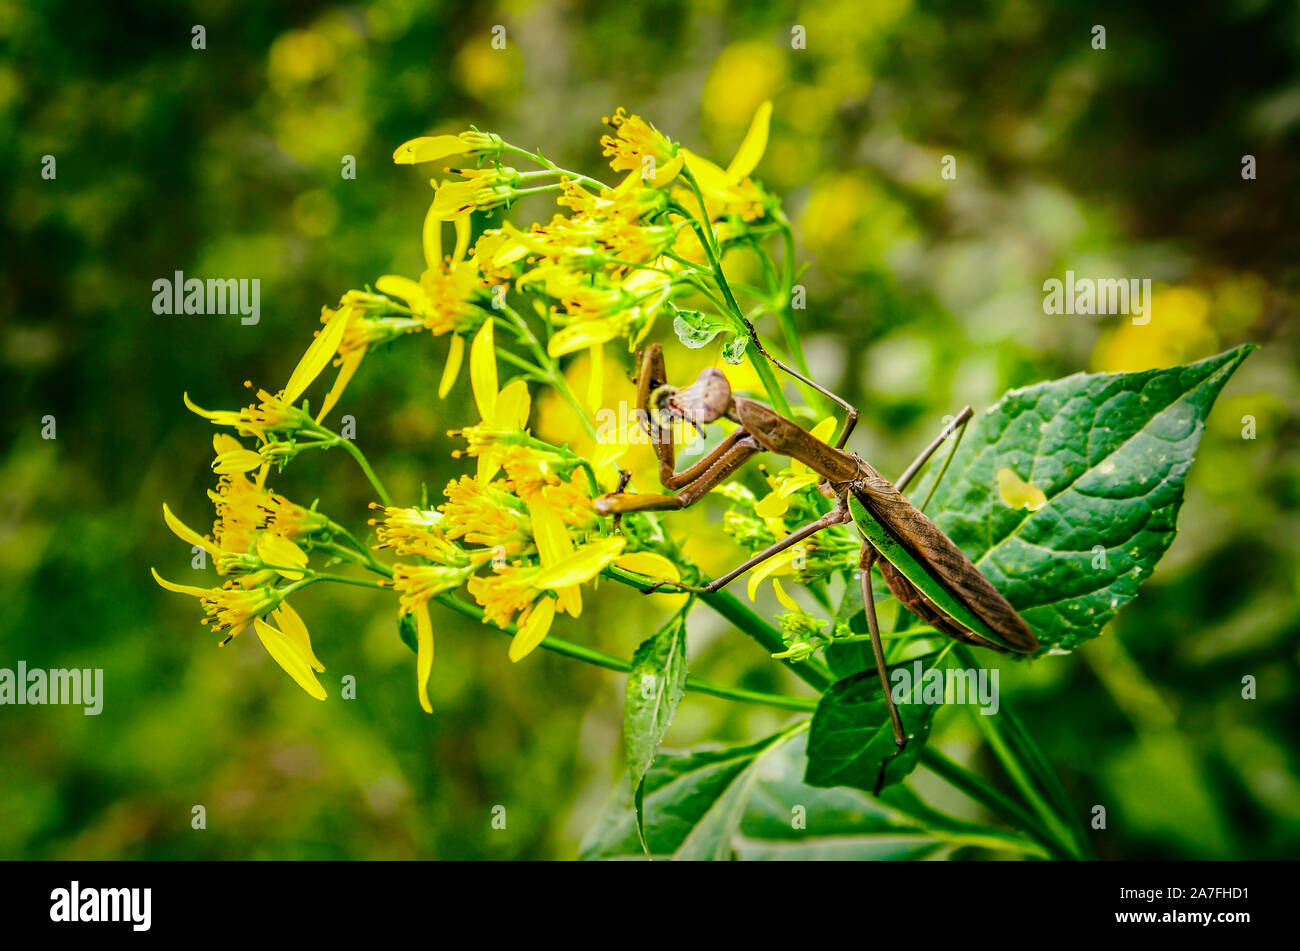 Macro closeup of brown insect praying mantis eating bee on yellow wingstem flowers with black tips Stock Photo